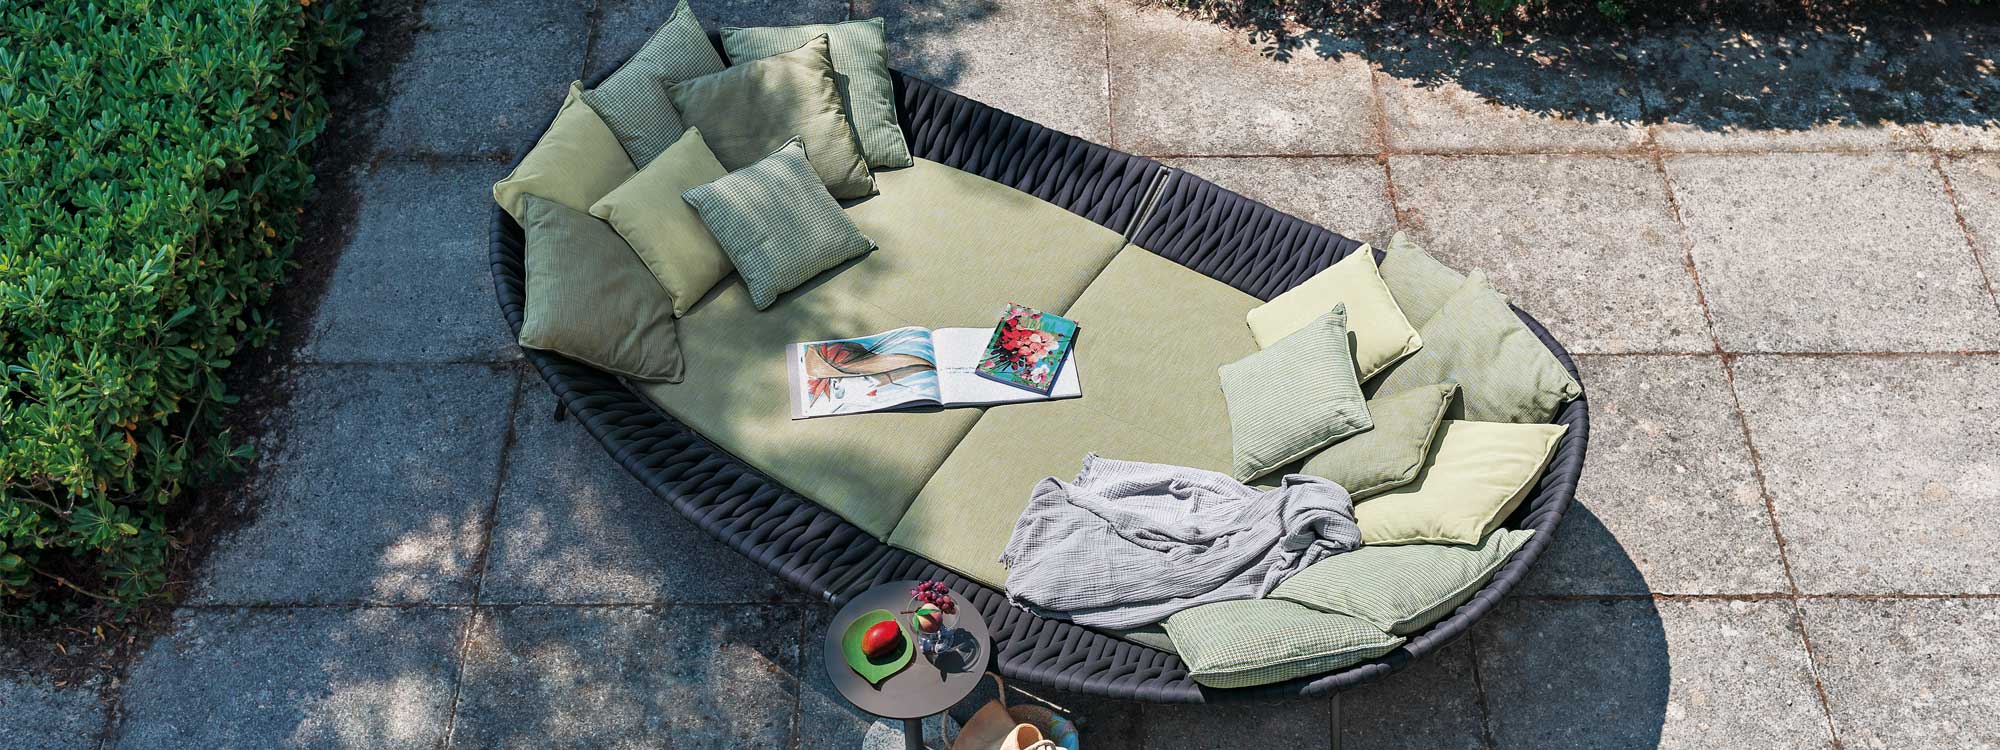 Pair of Arena garden daybeds together